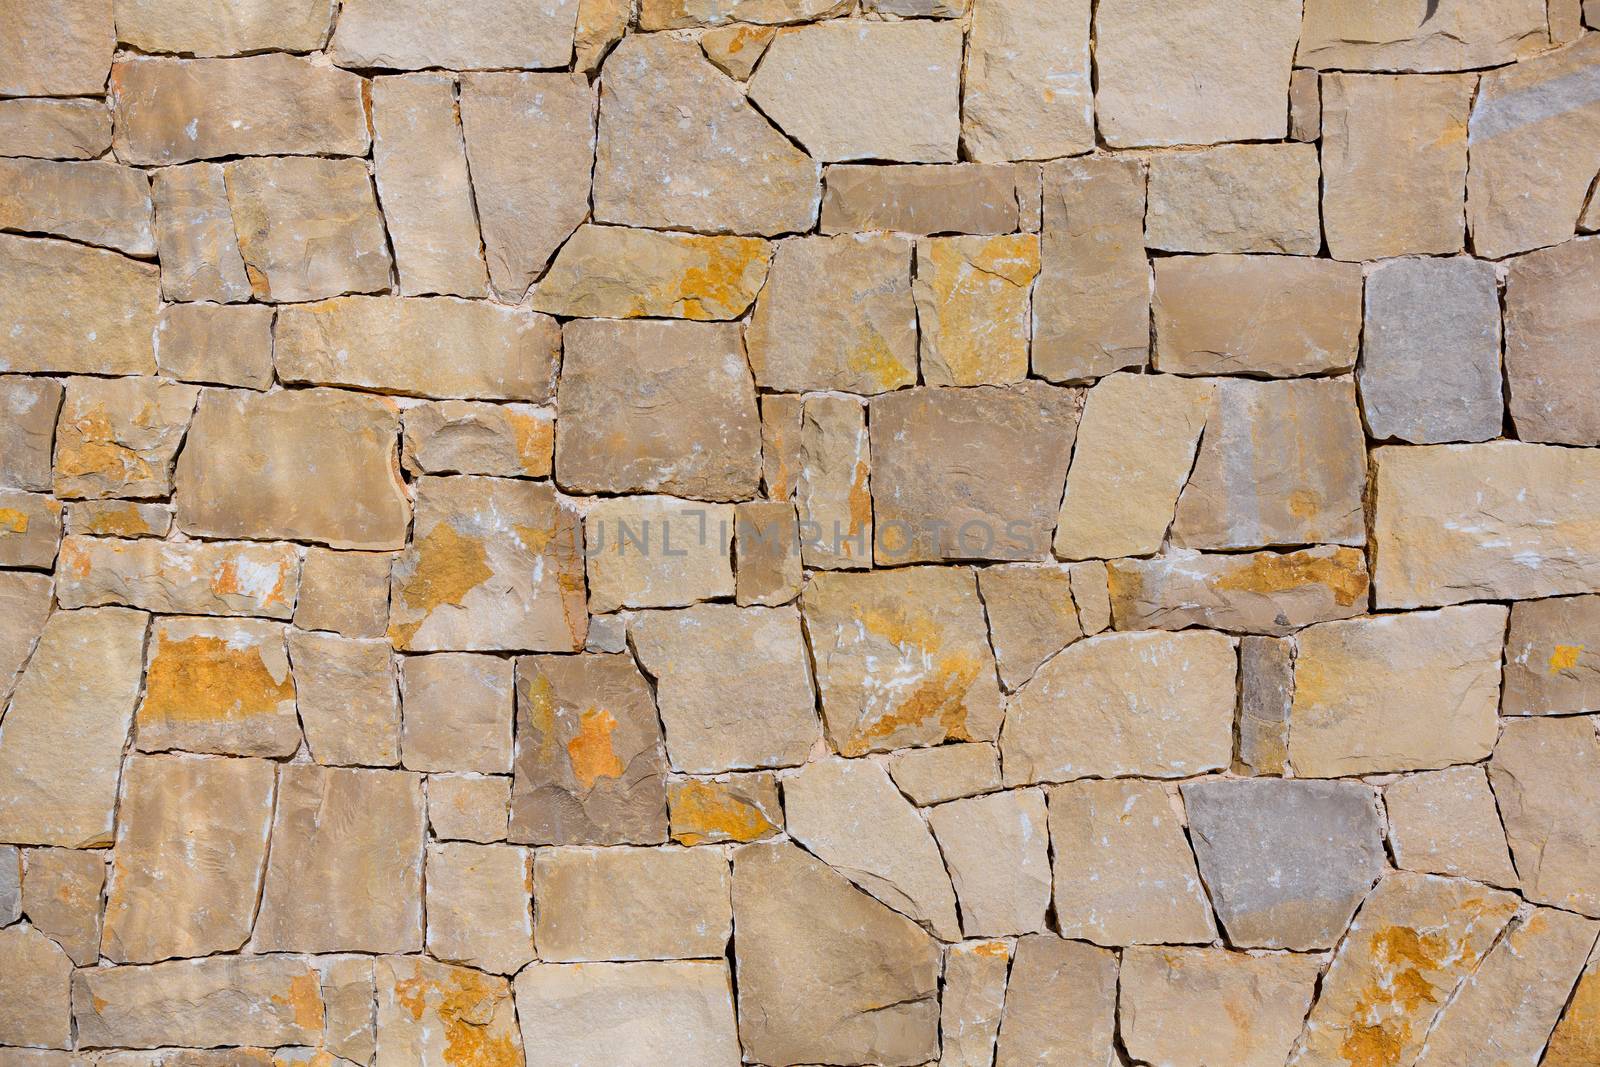 Masonry wall textre of handmade stones traditional style in Spain